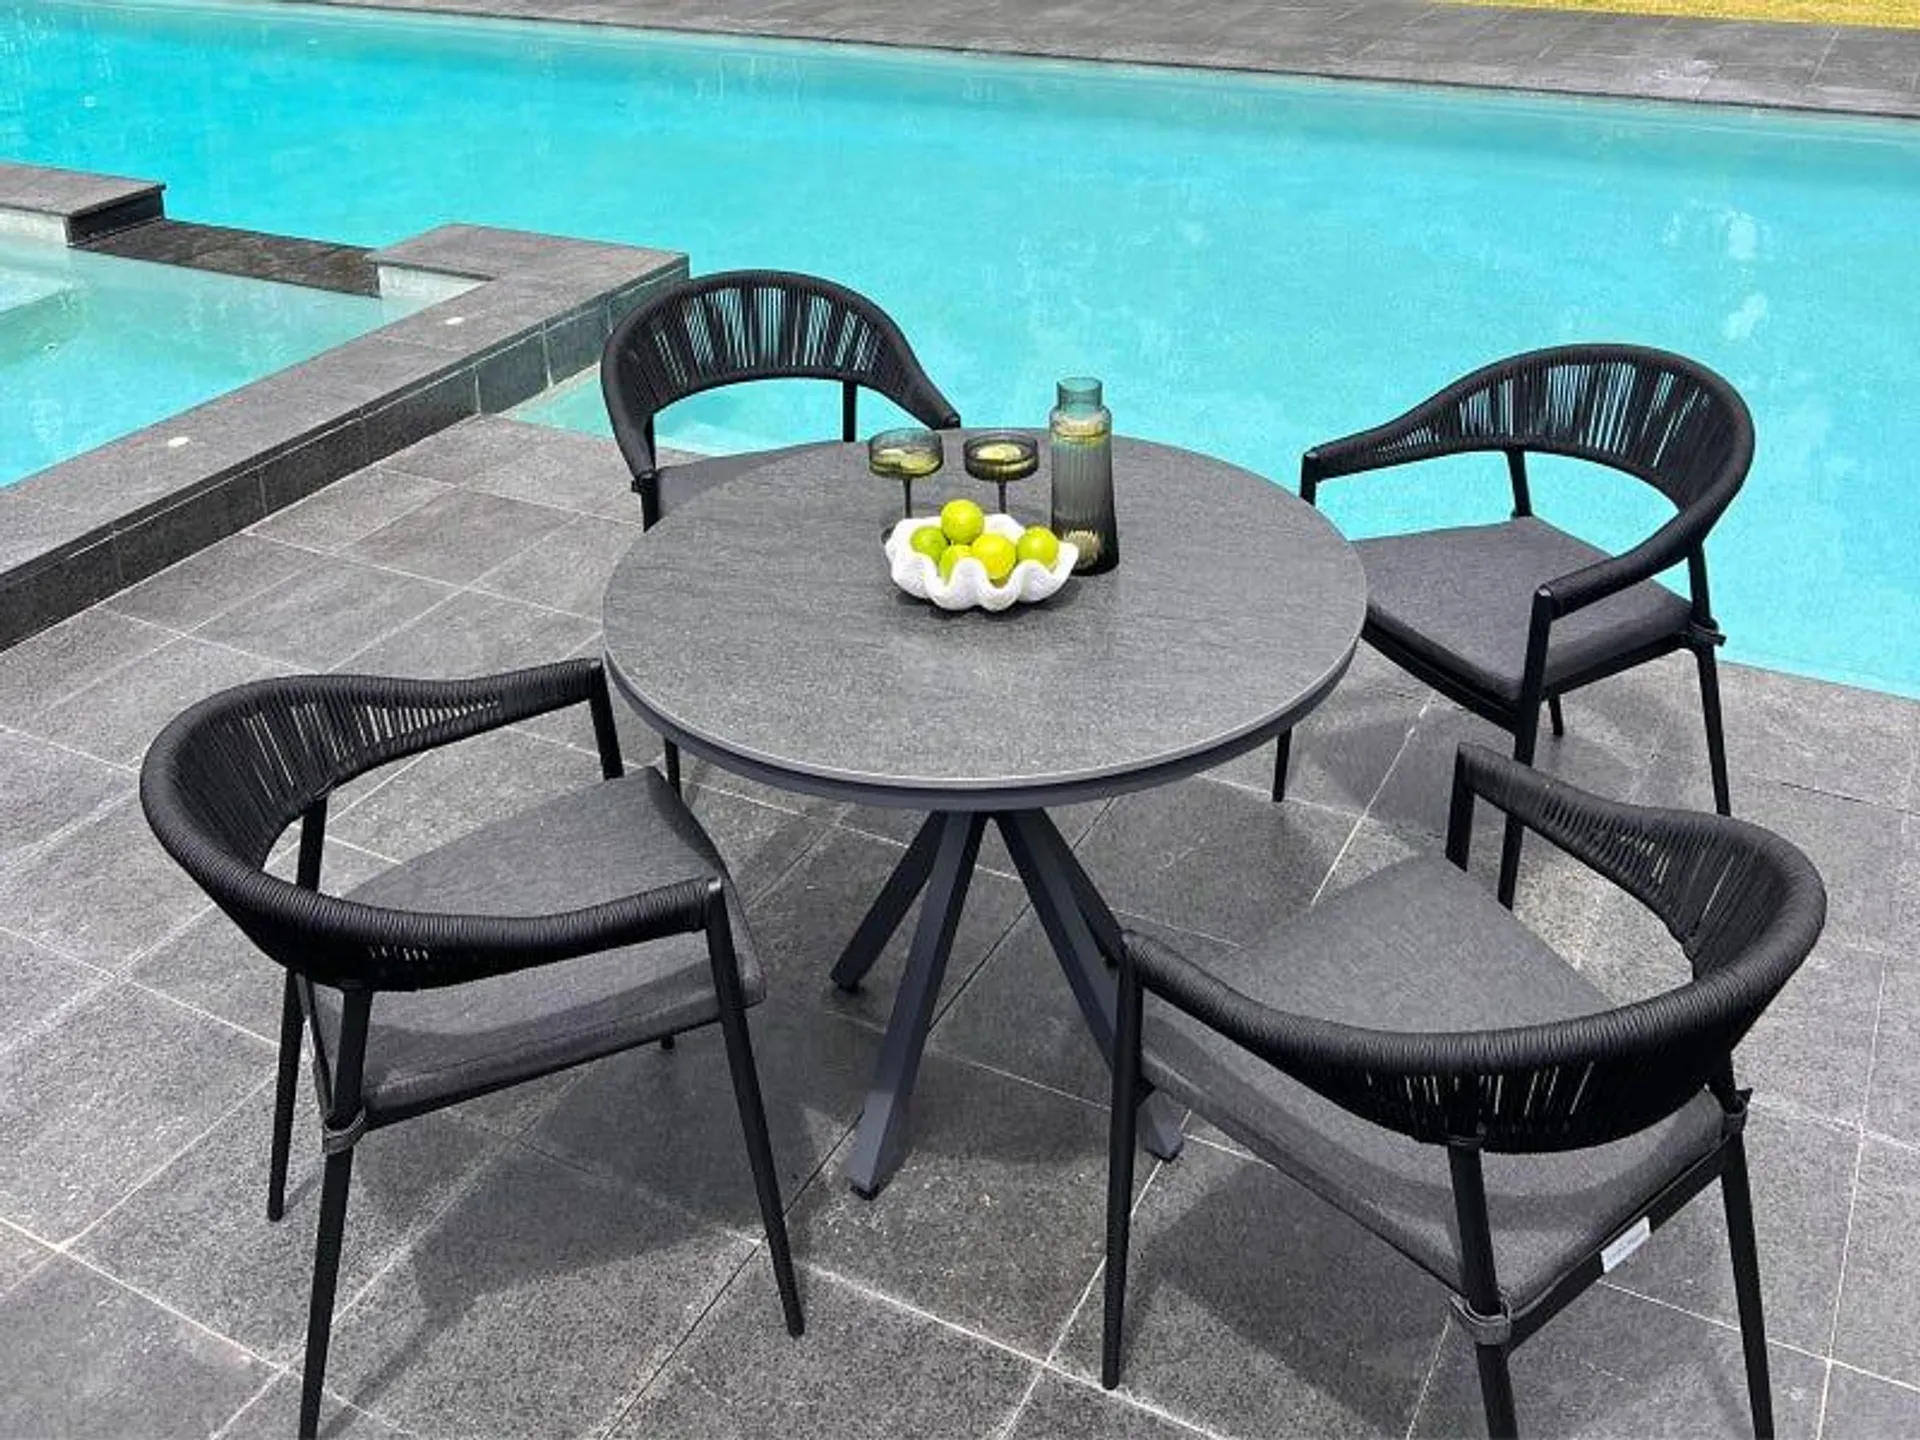 Adele Round Ceramic Table with Nivala Chairs 5pc Outdoor Dining Setting